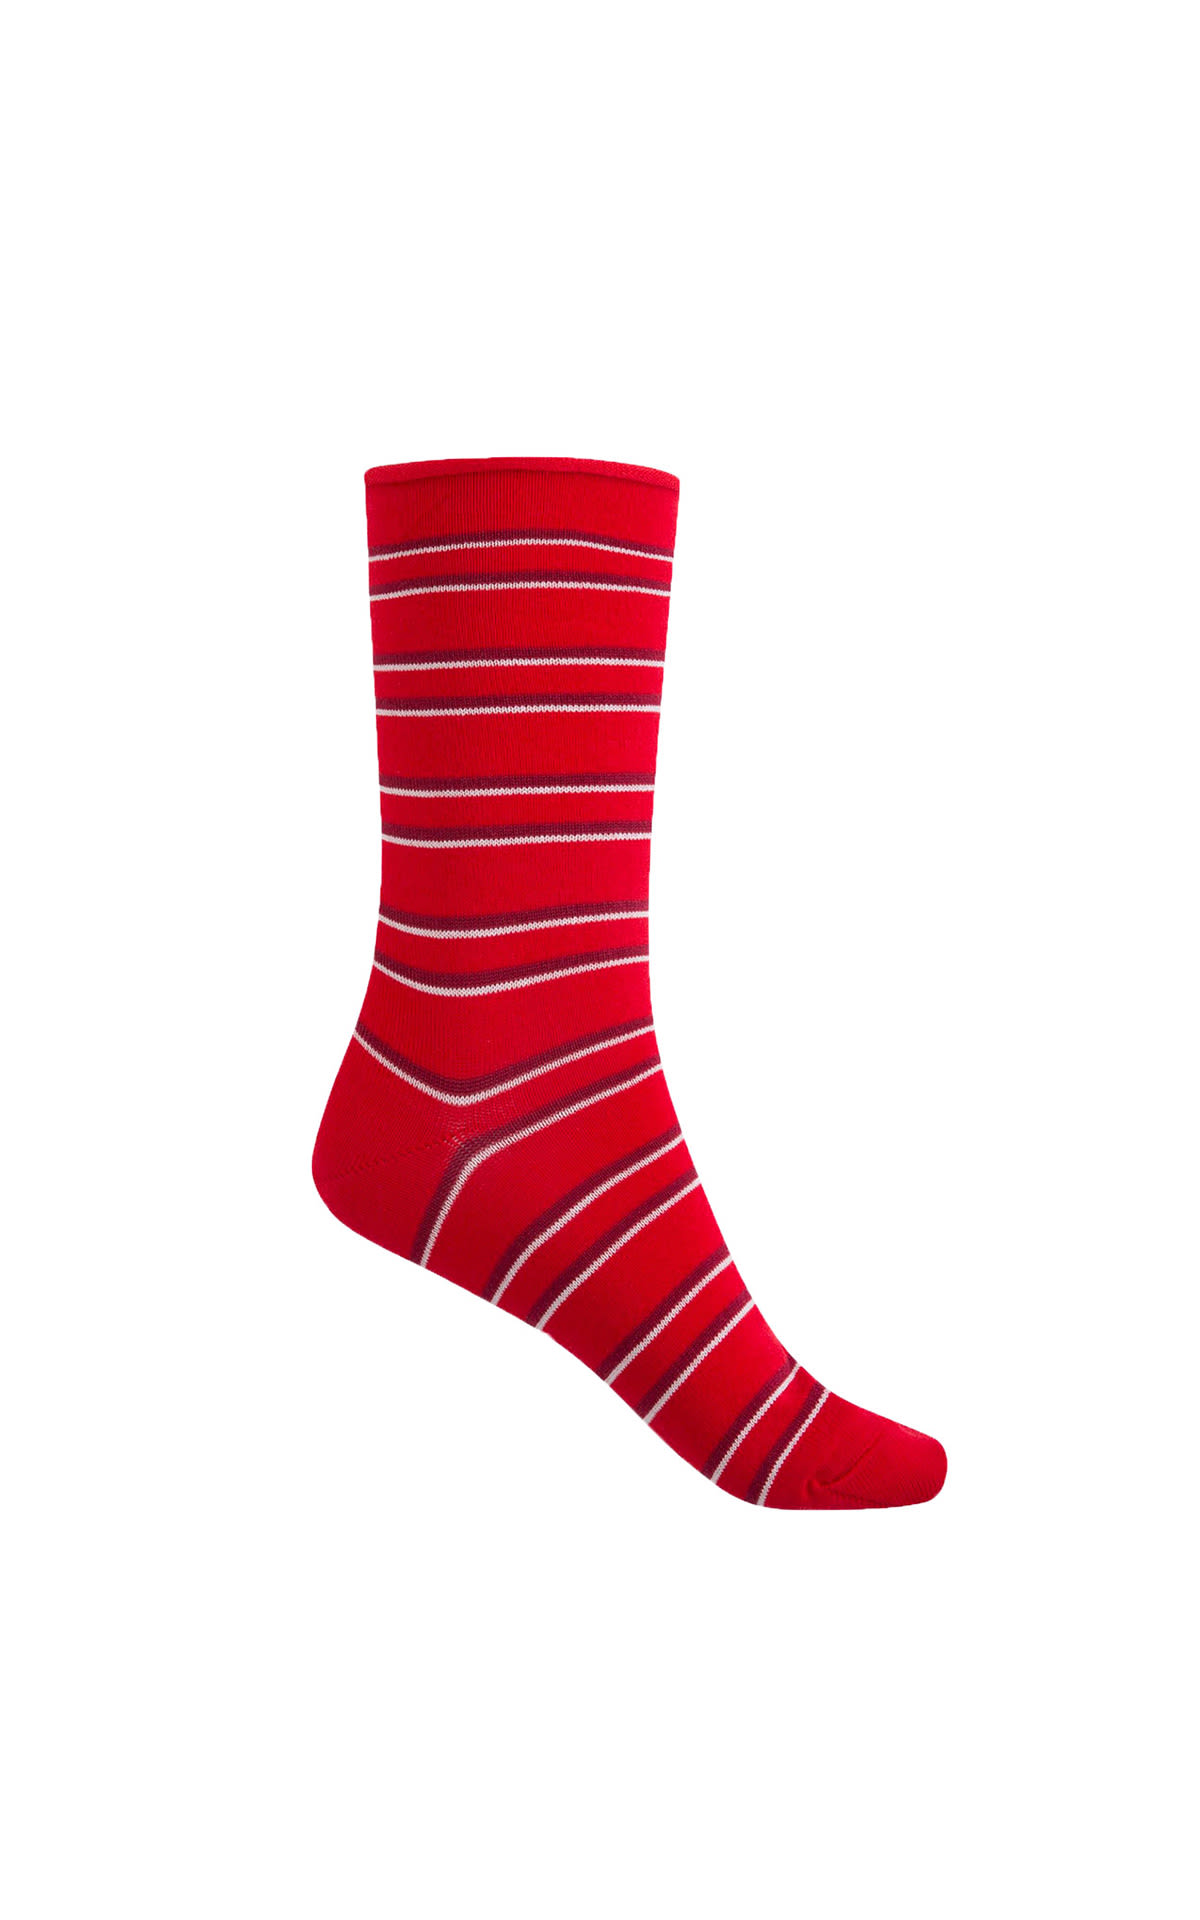 striped red sock